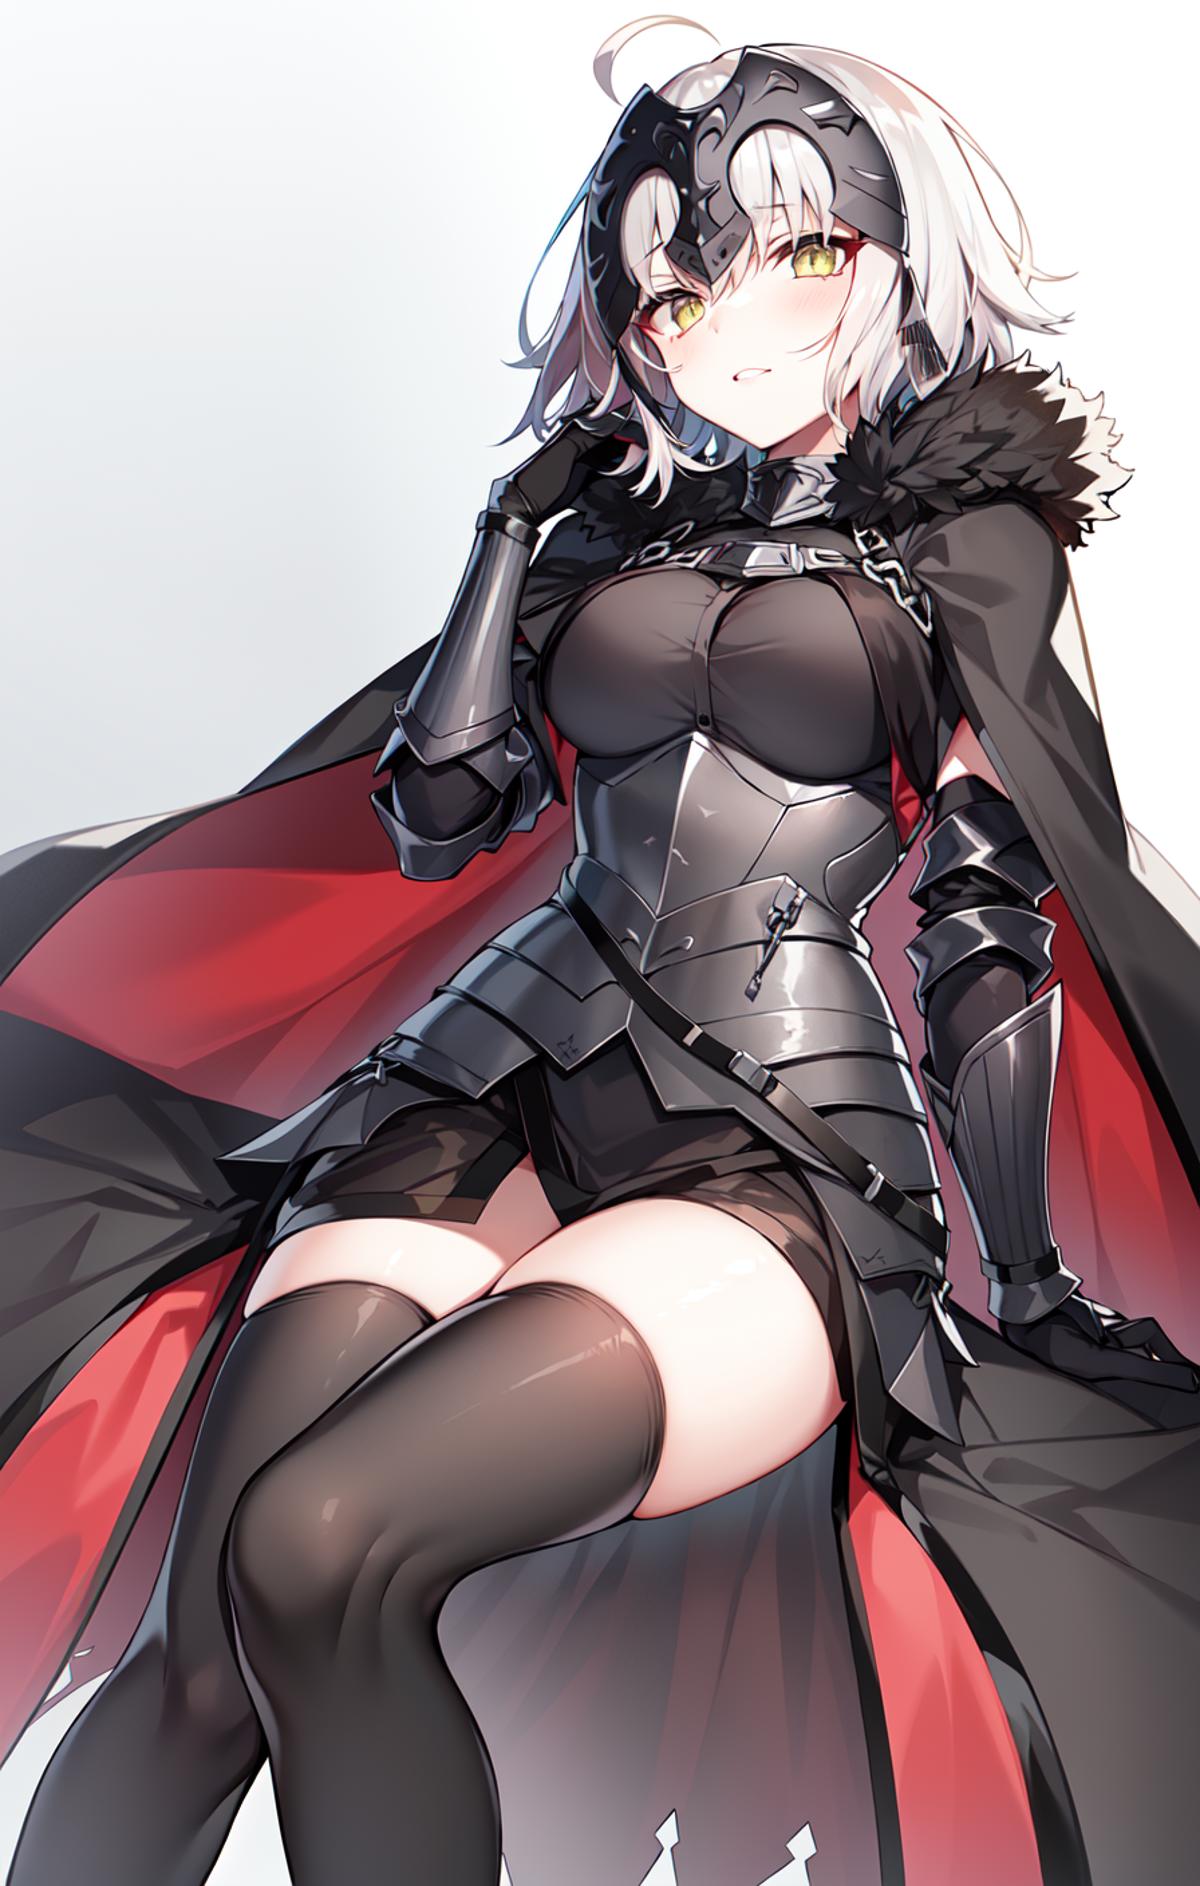 Jeanne d'Arc Alter 12 outfits (Fate Grand Order) 黑贞 12套外观 FGO image by RiuKi_MK1